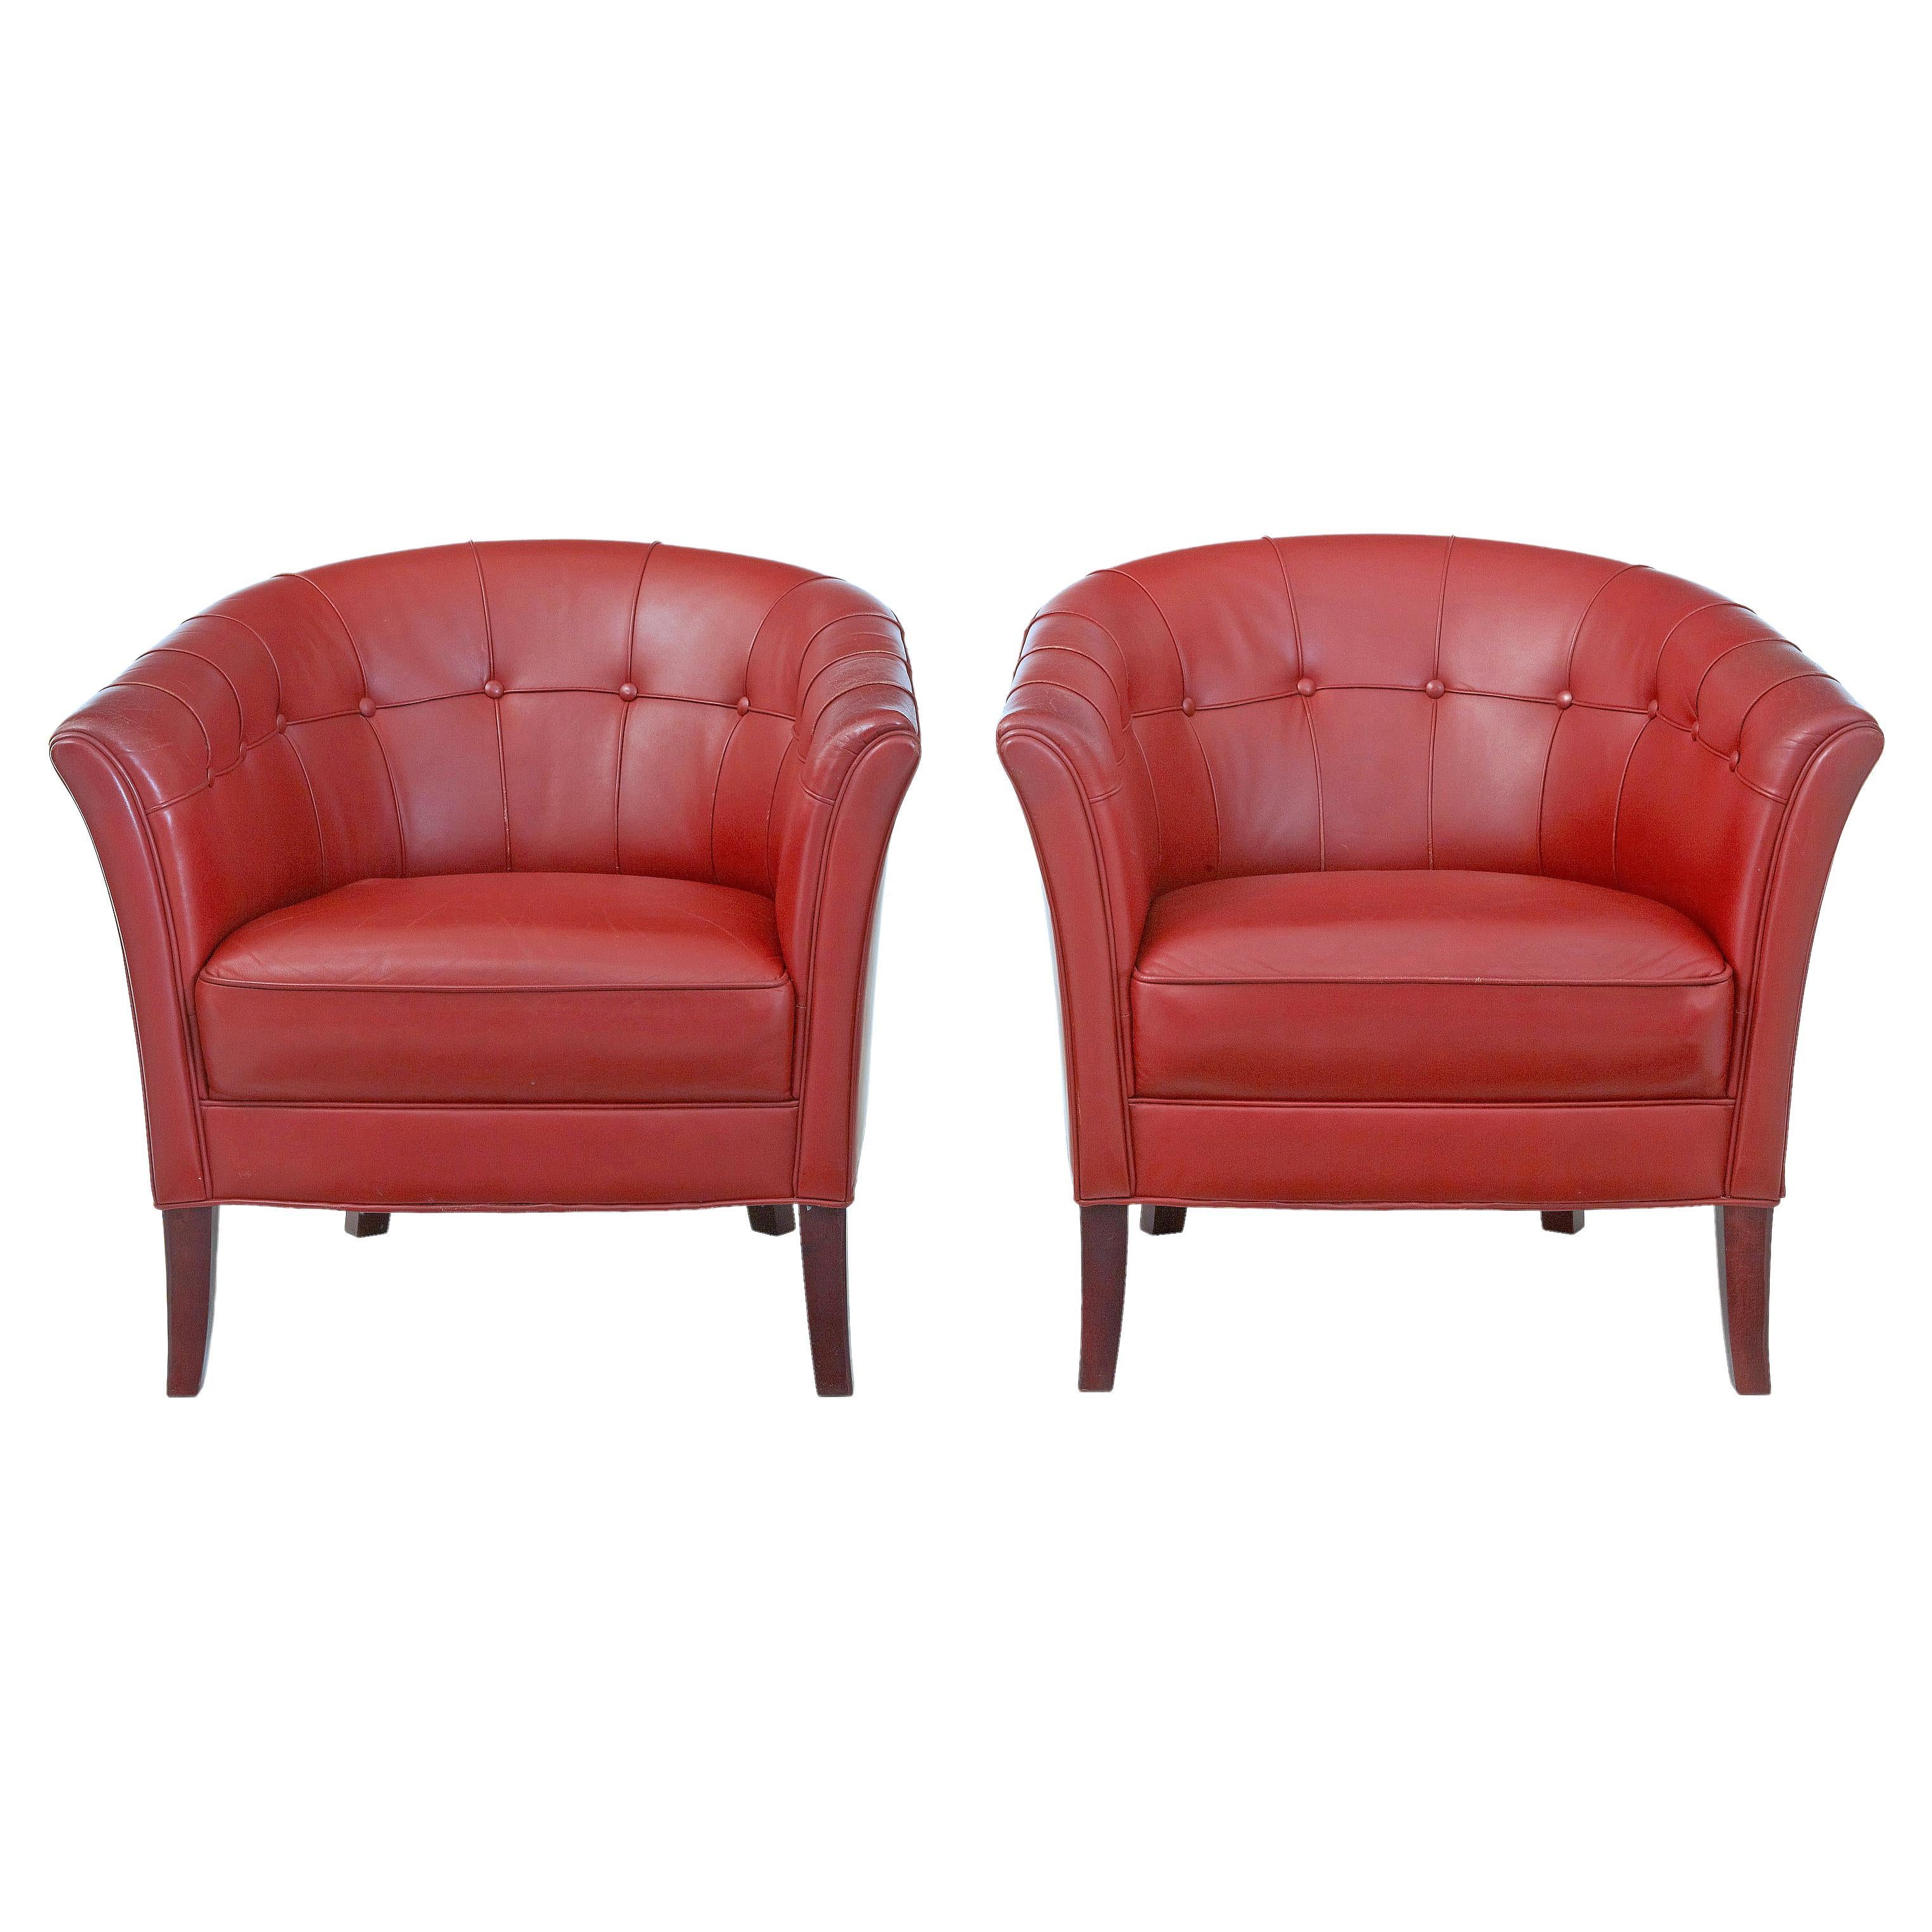 Pair of Mid-20th Century Scandinavian Leather Club Armchairs